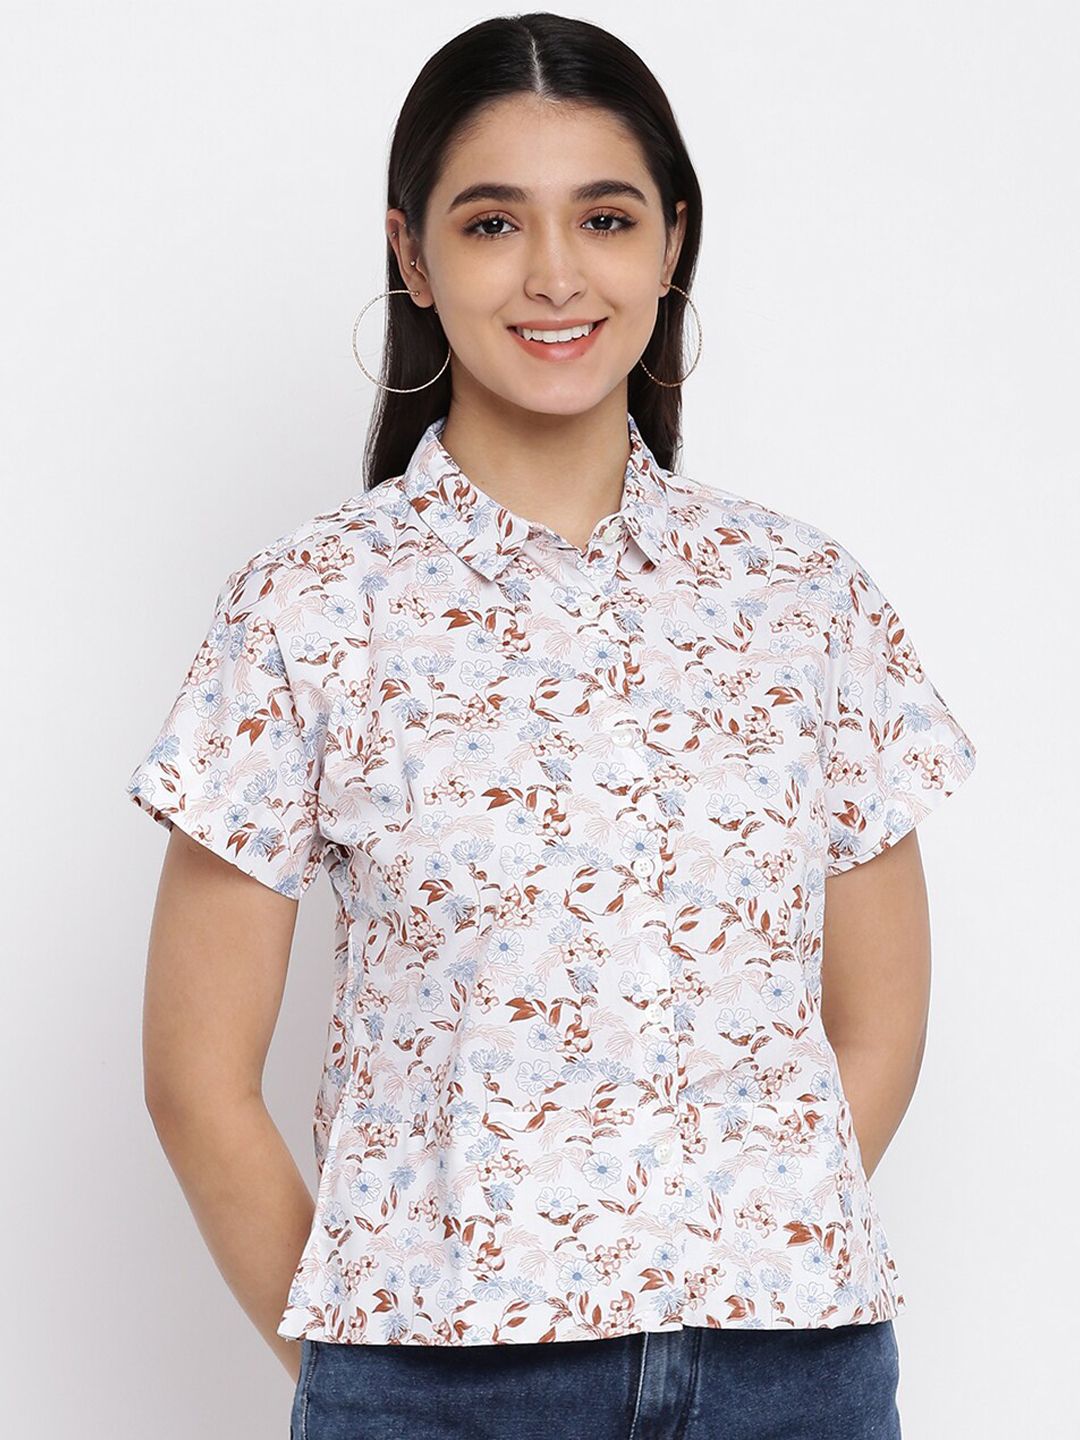 abof Off White & Brown Floral Print Shirt Style Top Price in India